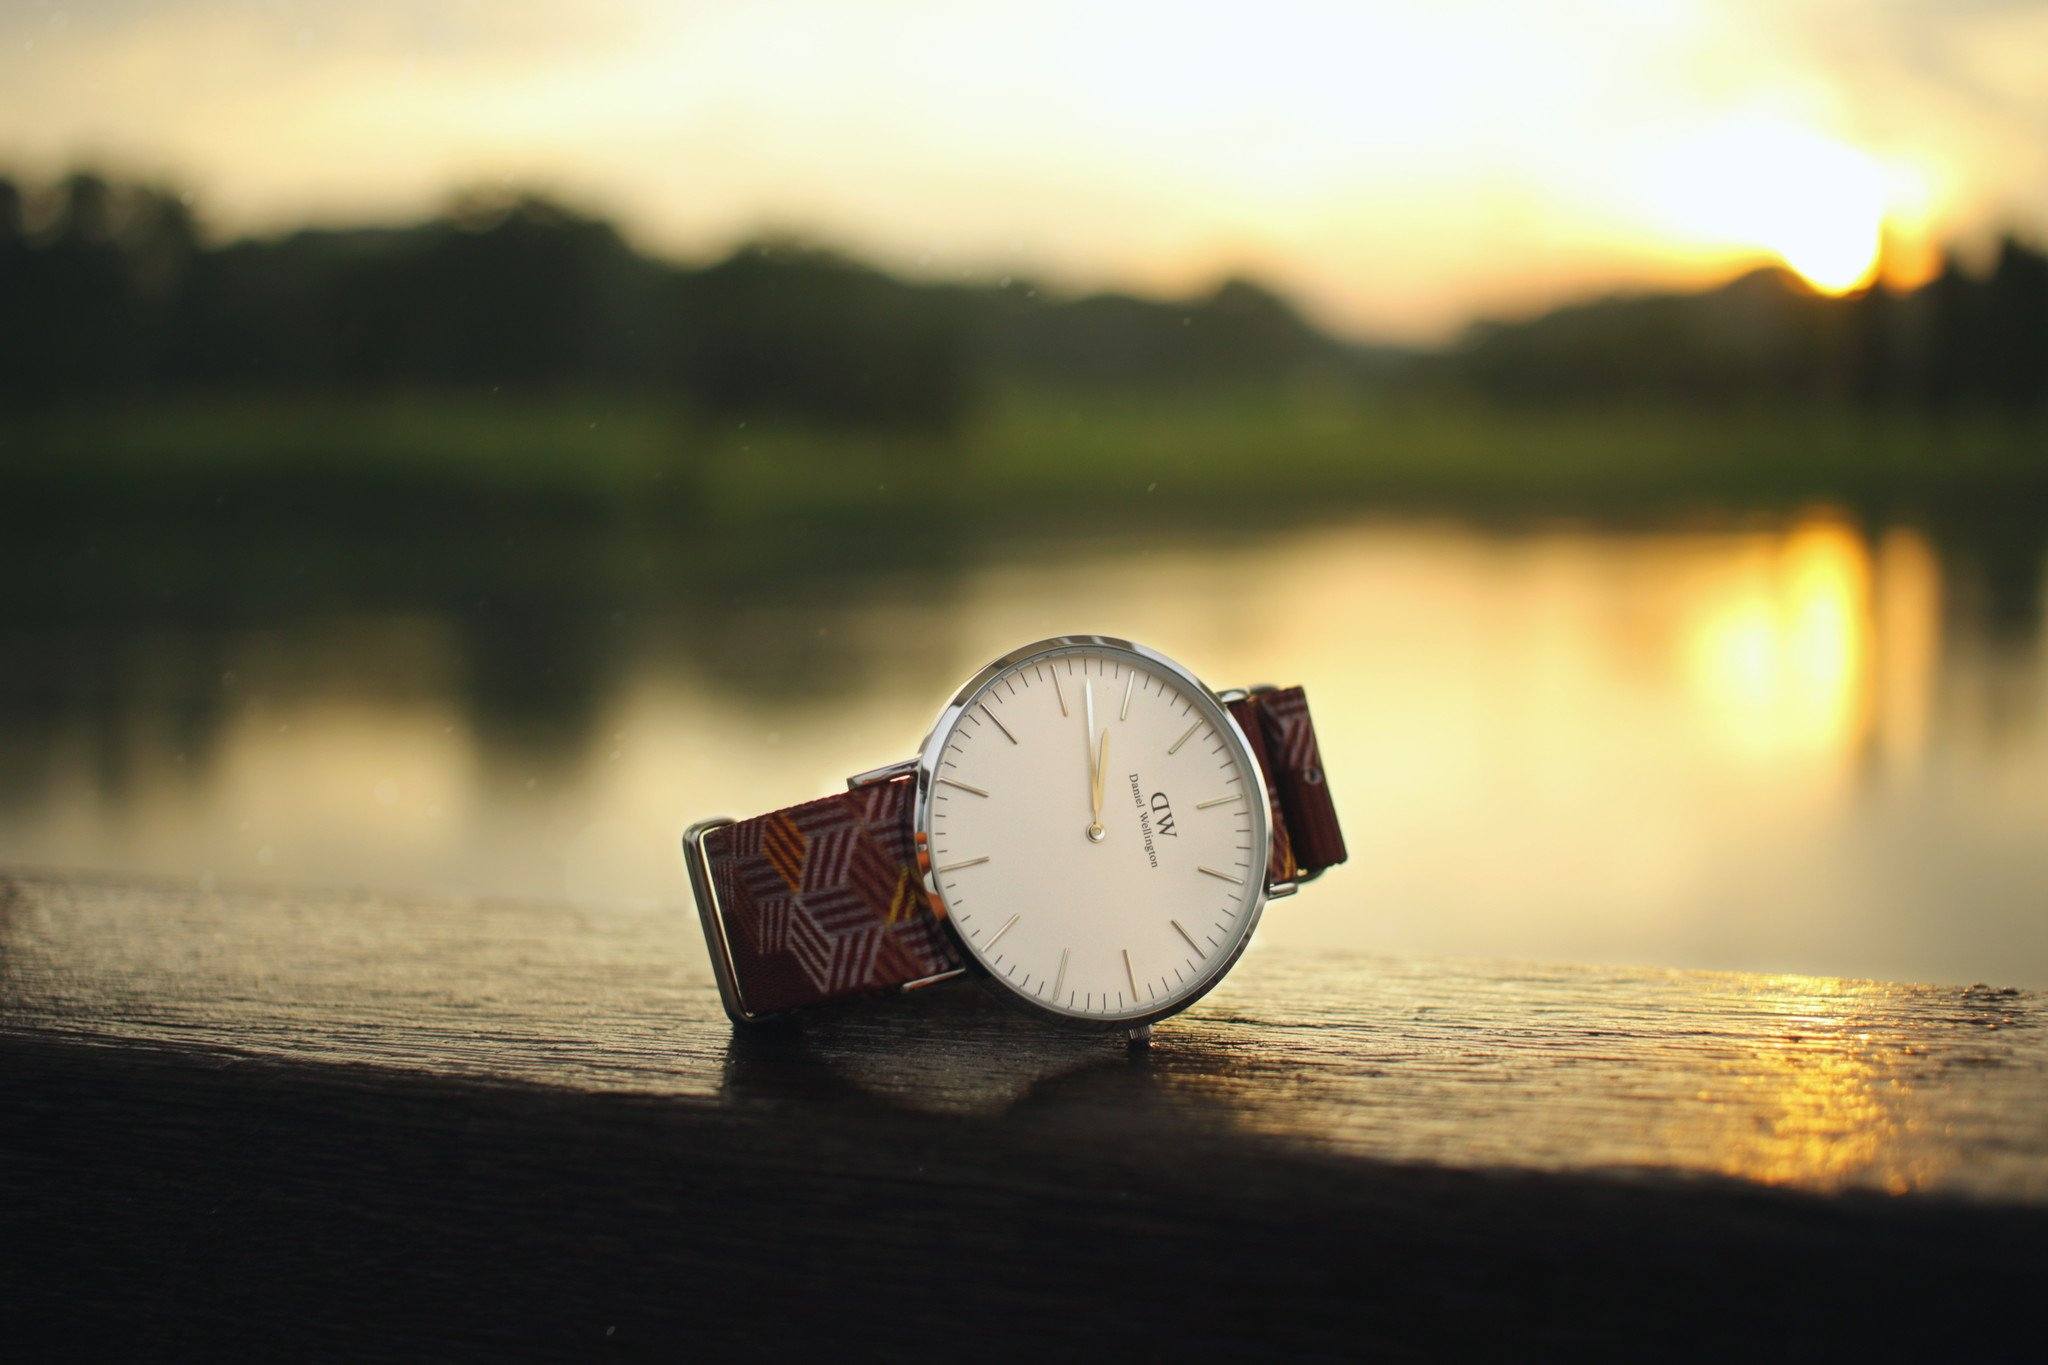 How to Dress Down your Daniel Wellington with Vario's straps